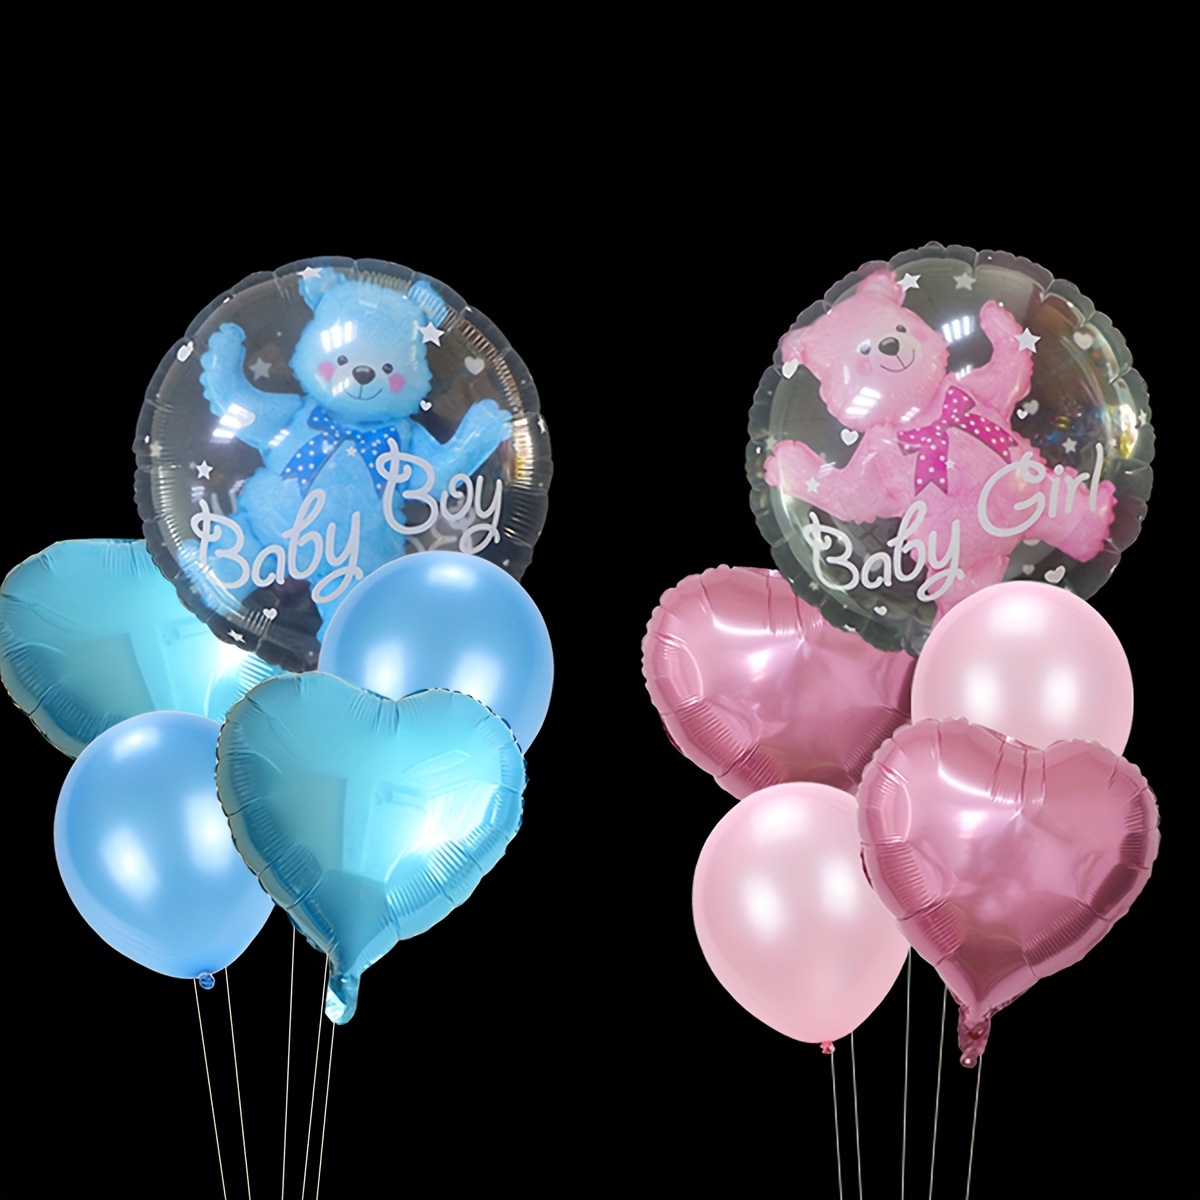 

5-piece Gender Reveal Balloon Set - Blue & Pink Bear Transparent Foil Balloons With Heart Accents For Baby Shower & First Birthday Party Decorations